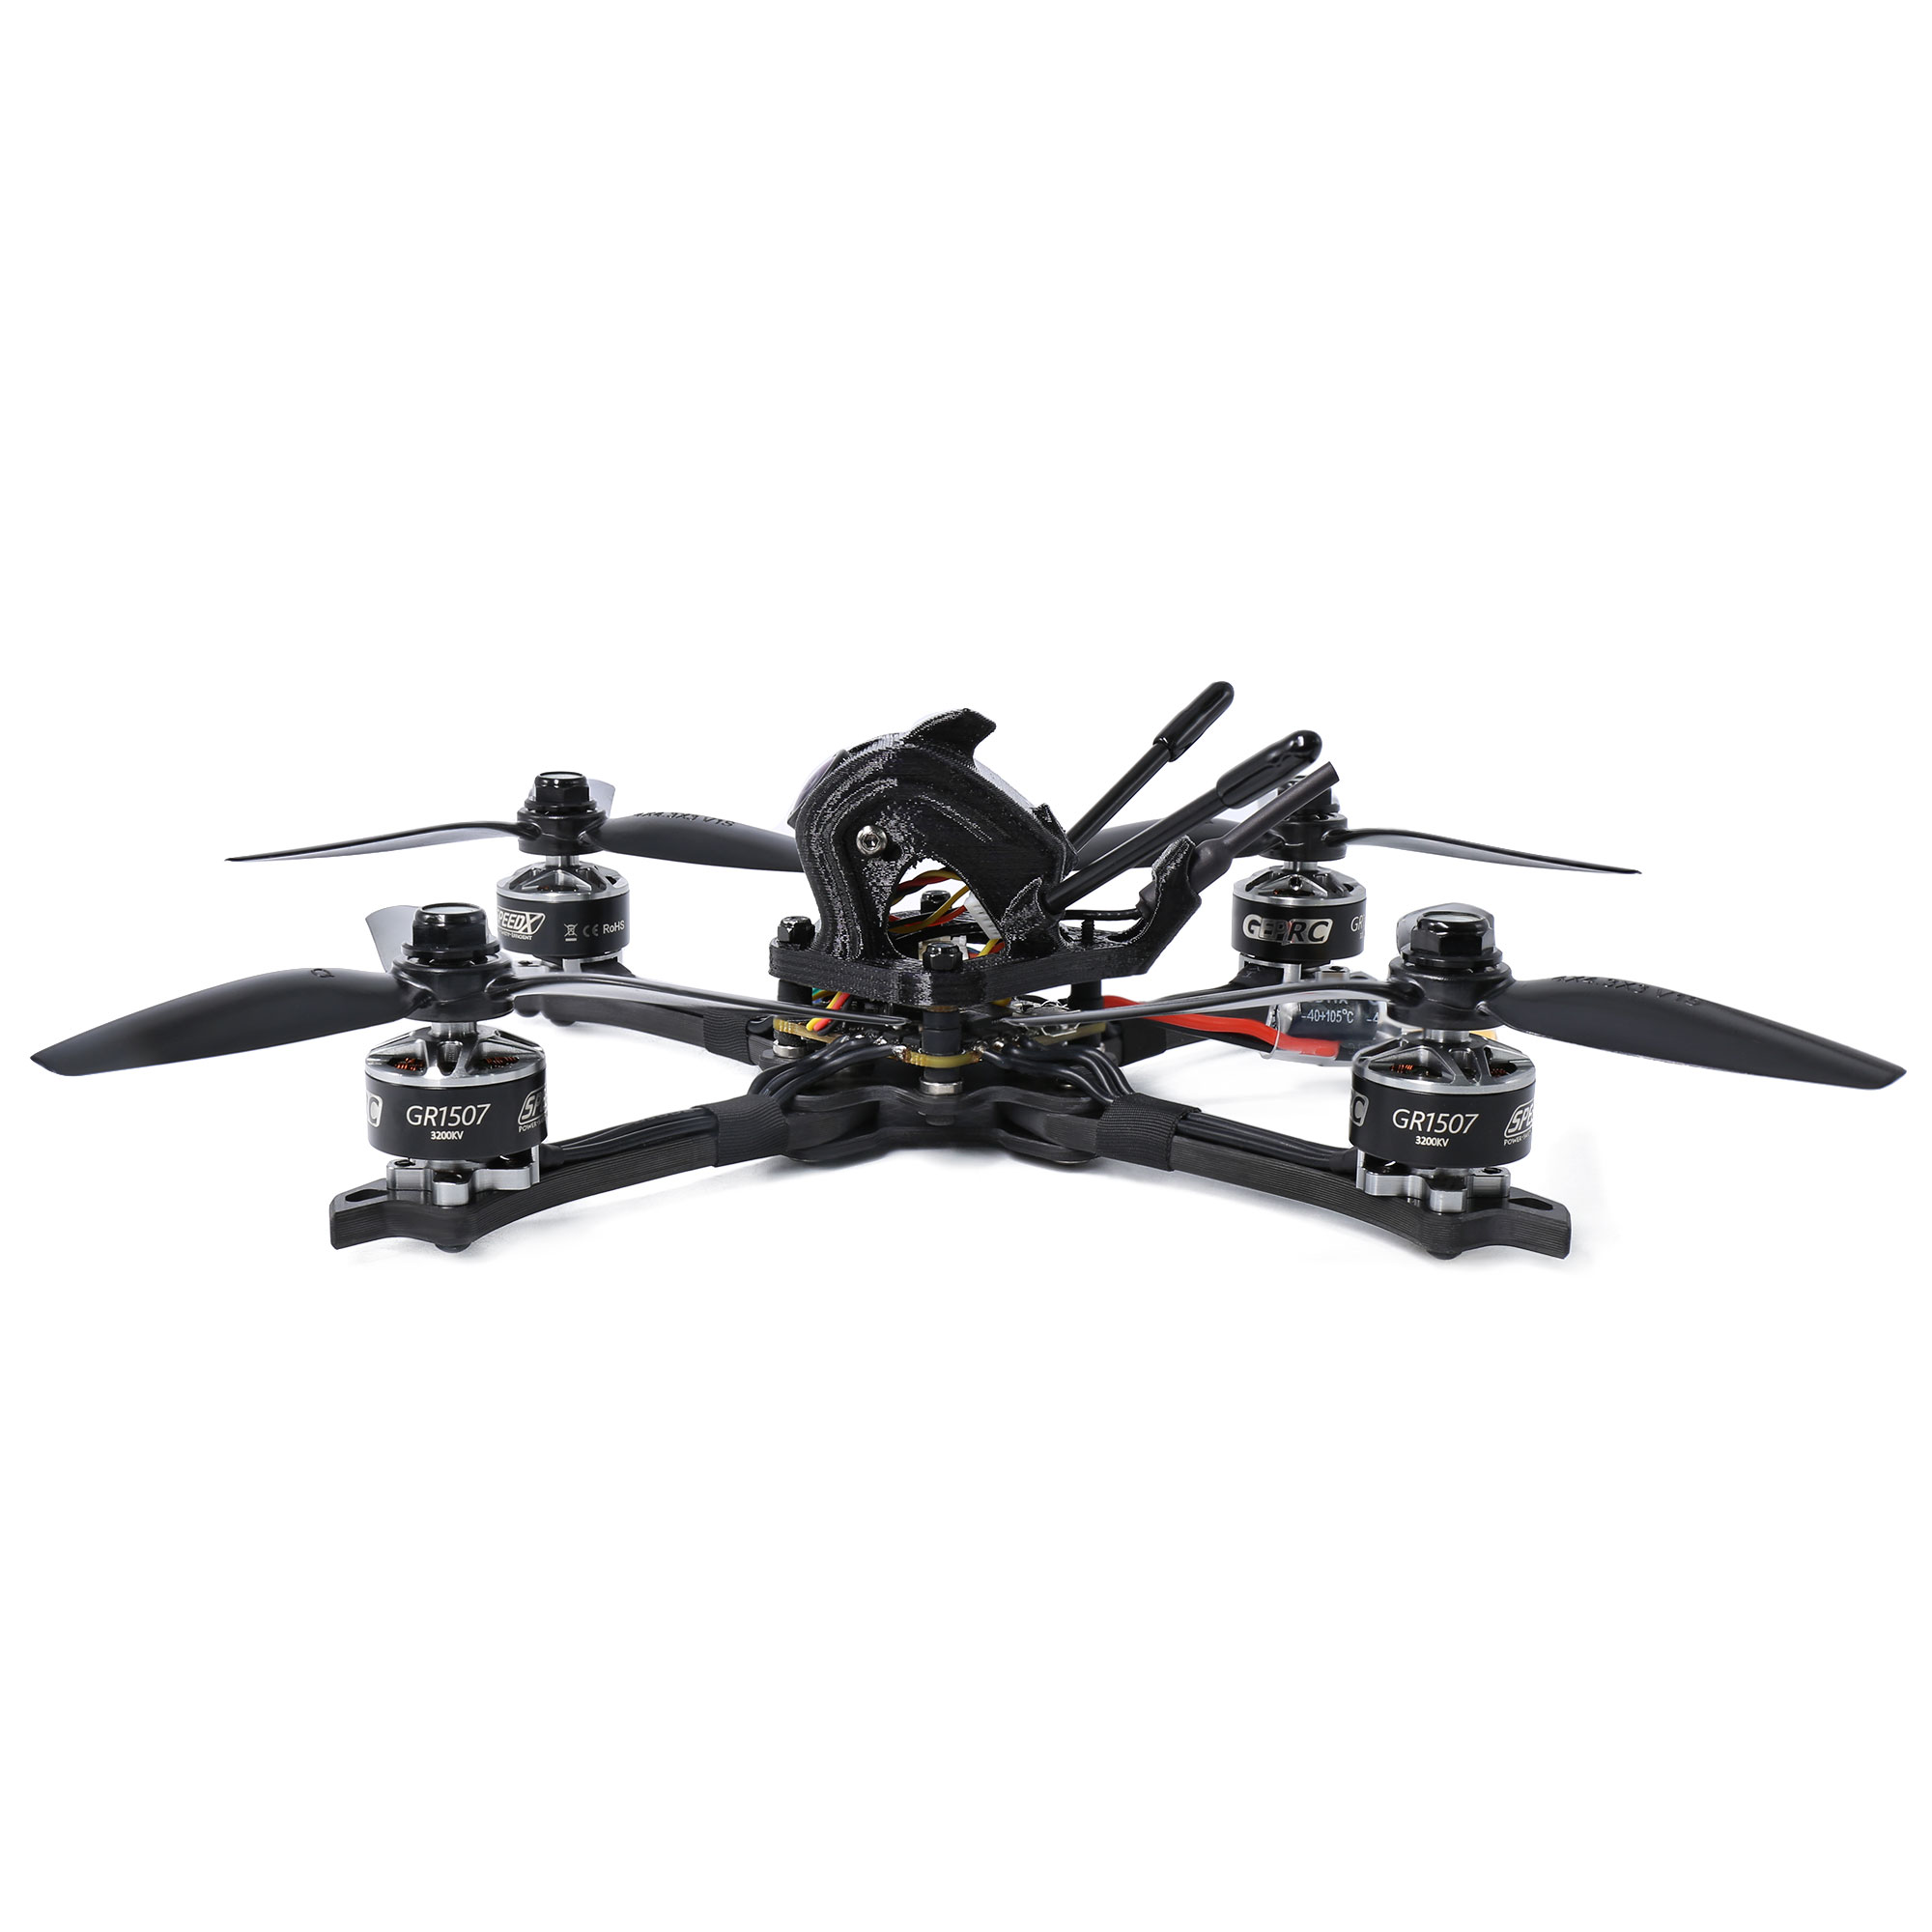 GEPRC-Dolphin-153mm-4S-4Inch-FPV-Racing-RC-Drone-Tootkpick-BNFPNP-Caddx-Turbo-EOS2-58G-RHCP-GEP-20A--1615313-6